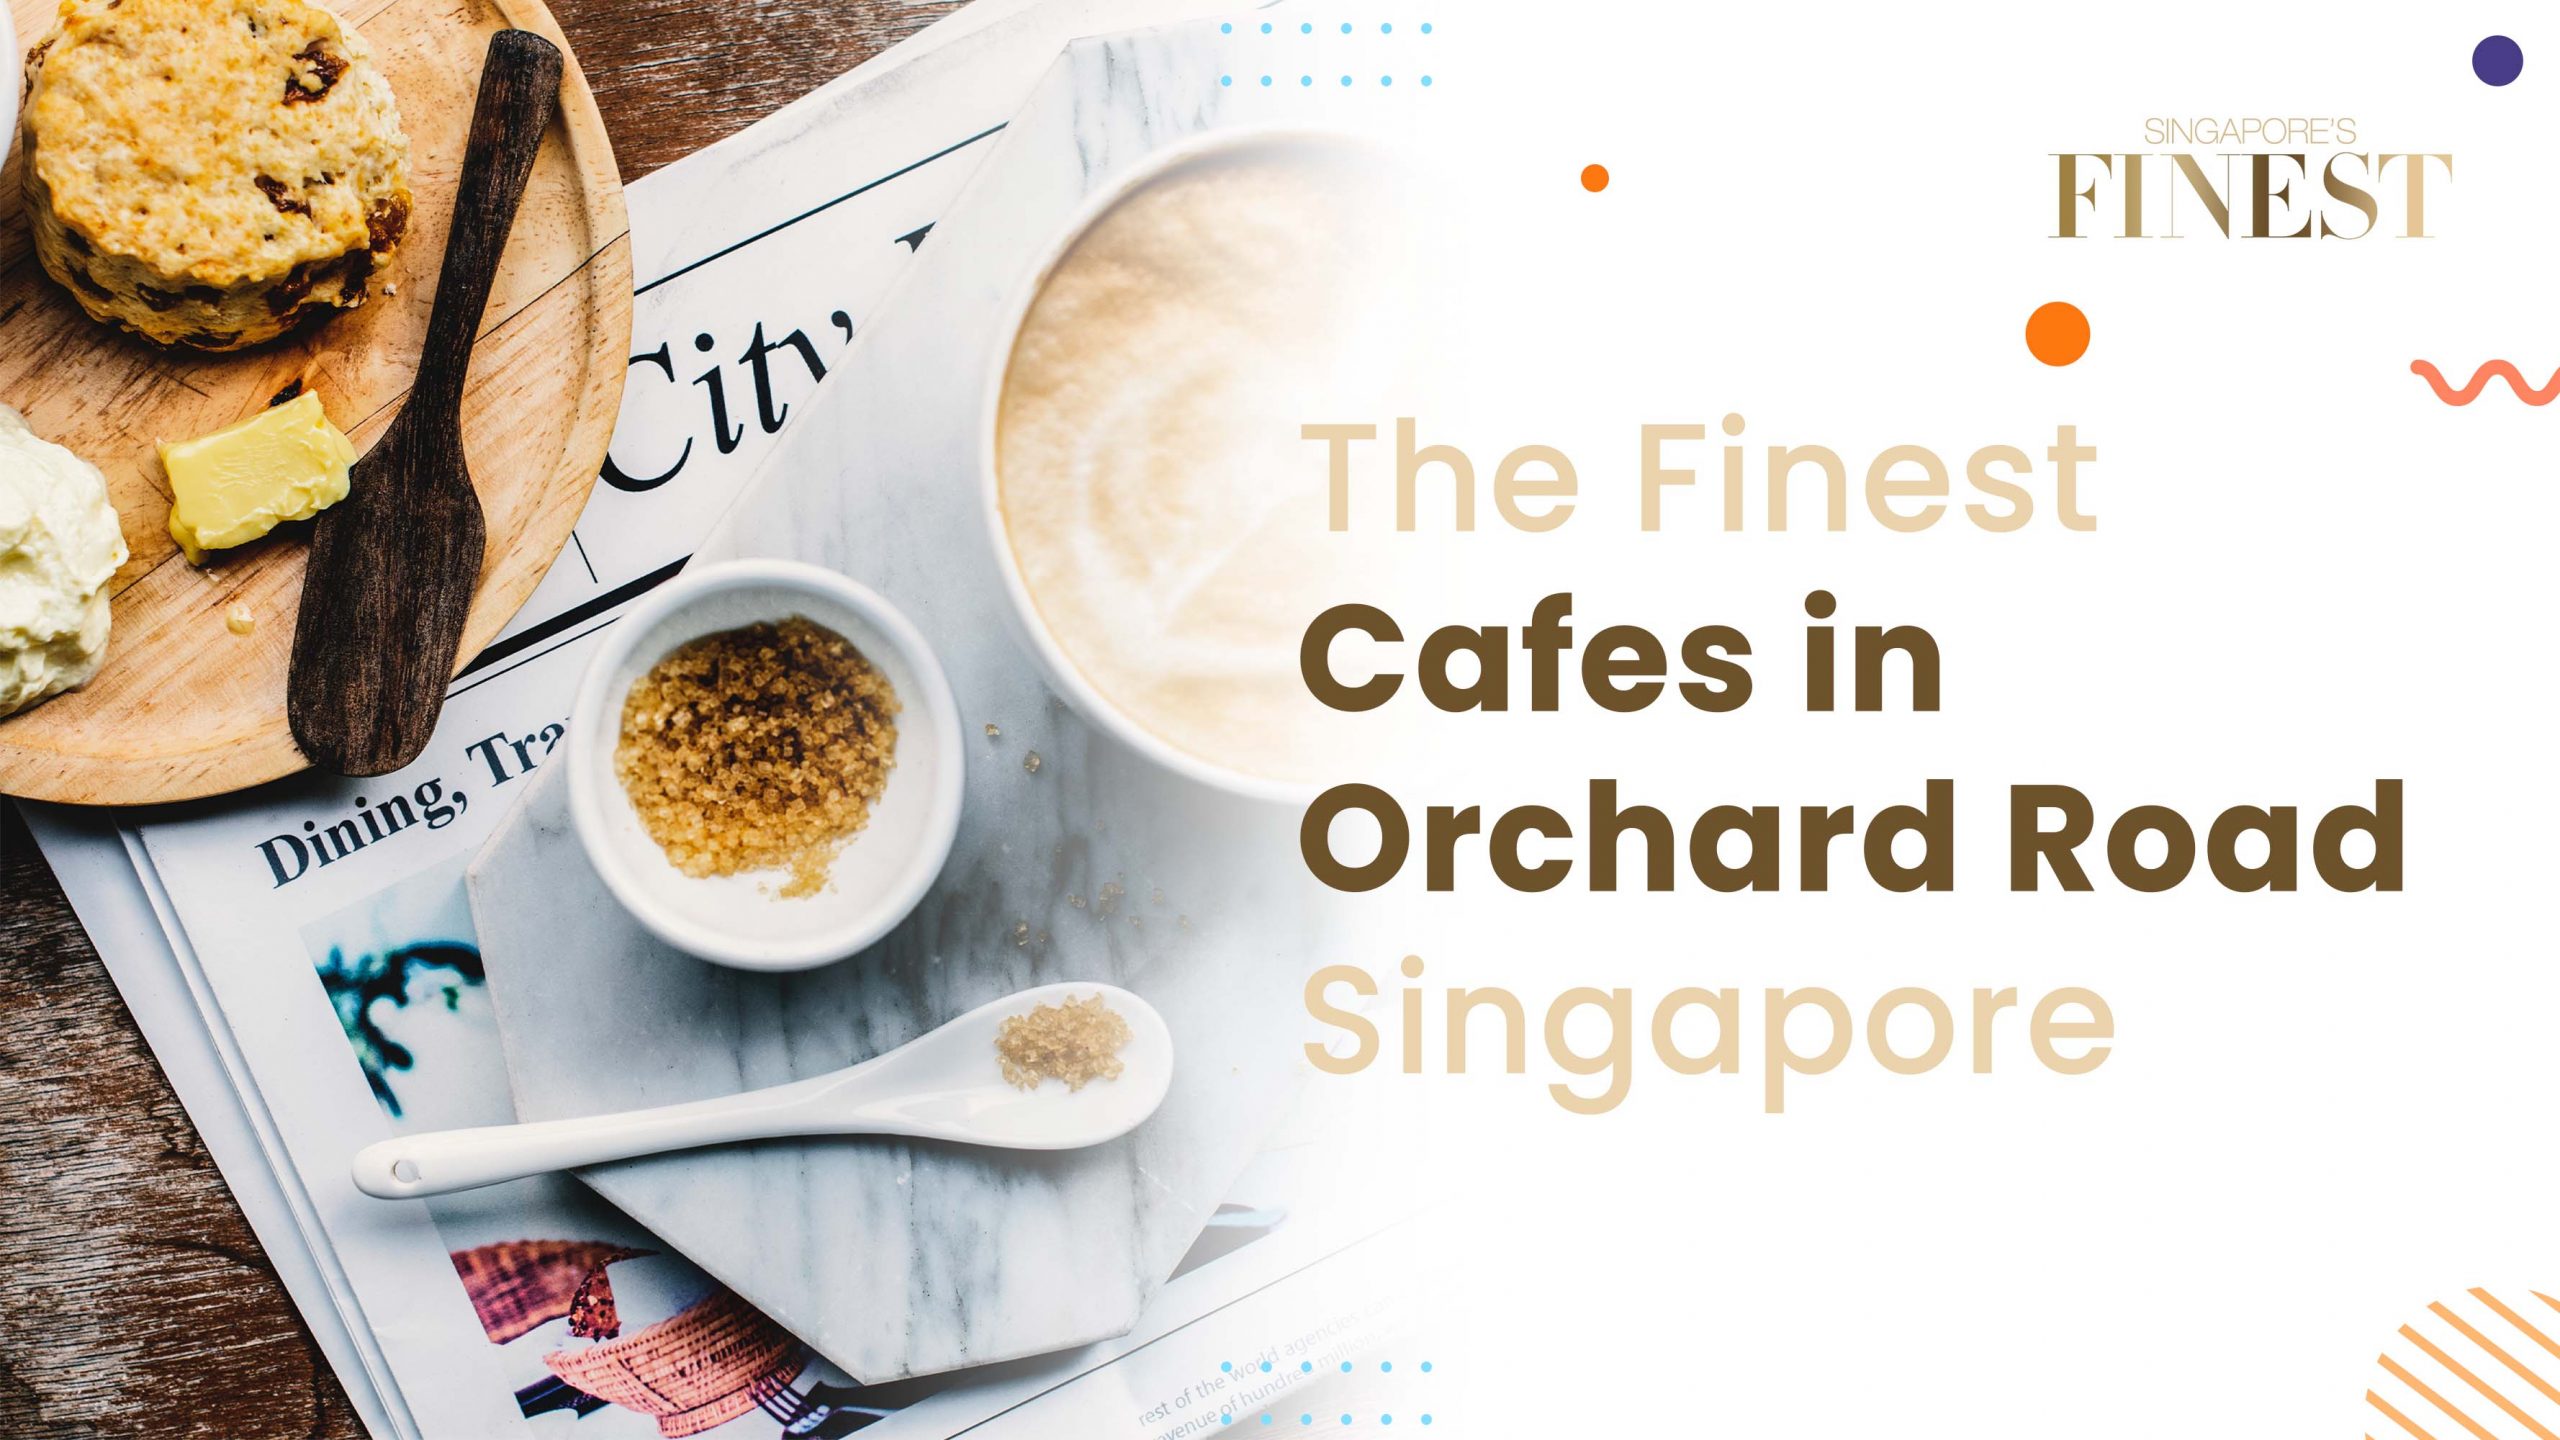 The Finest Cafes in Orchard Road